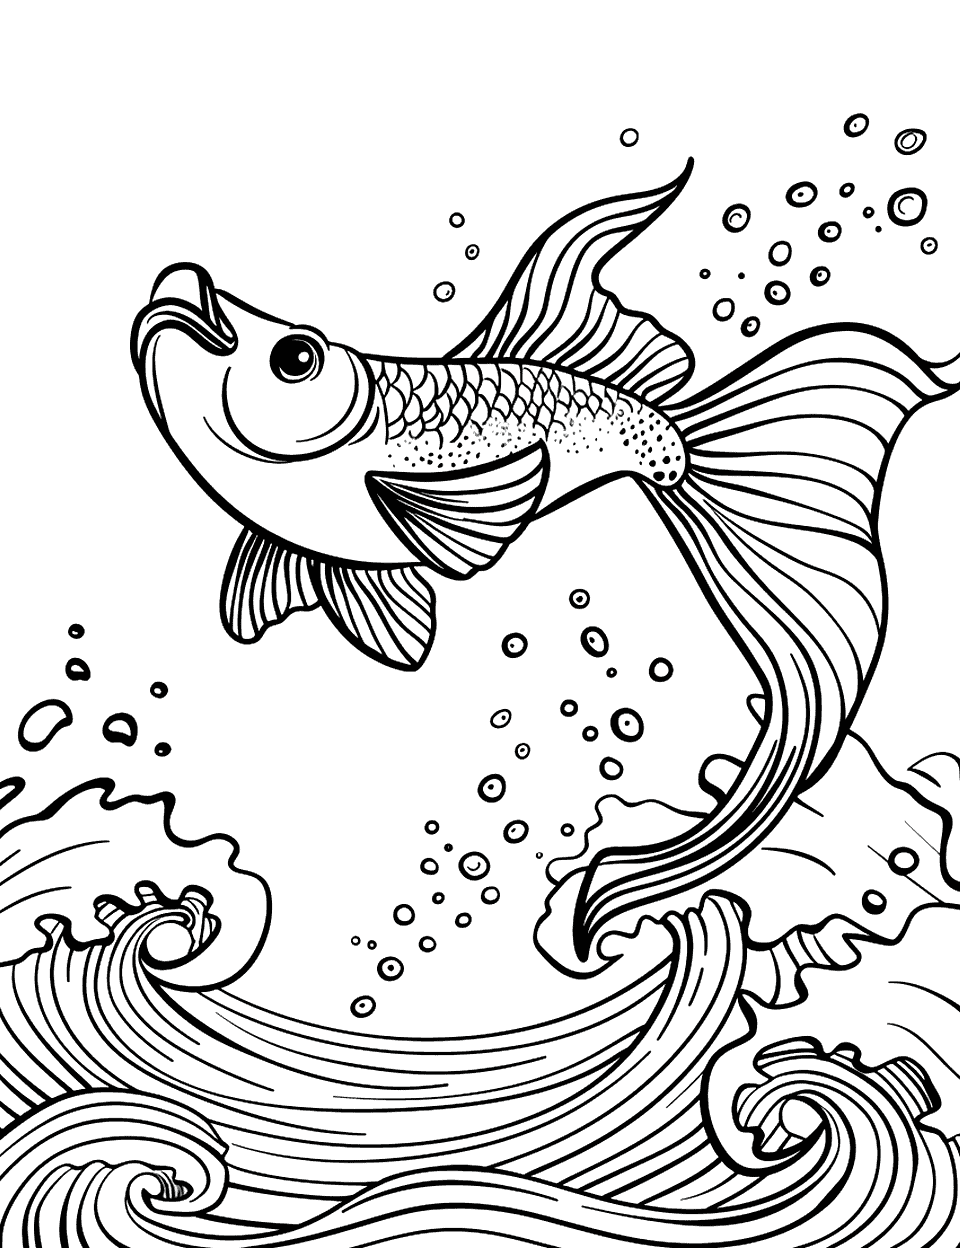 Flying Fish Leaping from Waves Sea Creature Coloring Page - A flying fish leaps out of the water, showing up above the surface momentarily.